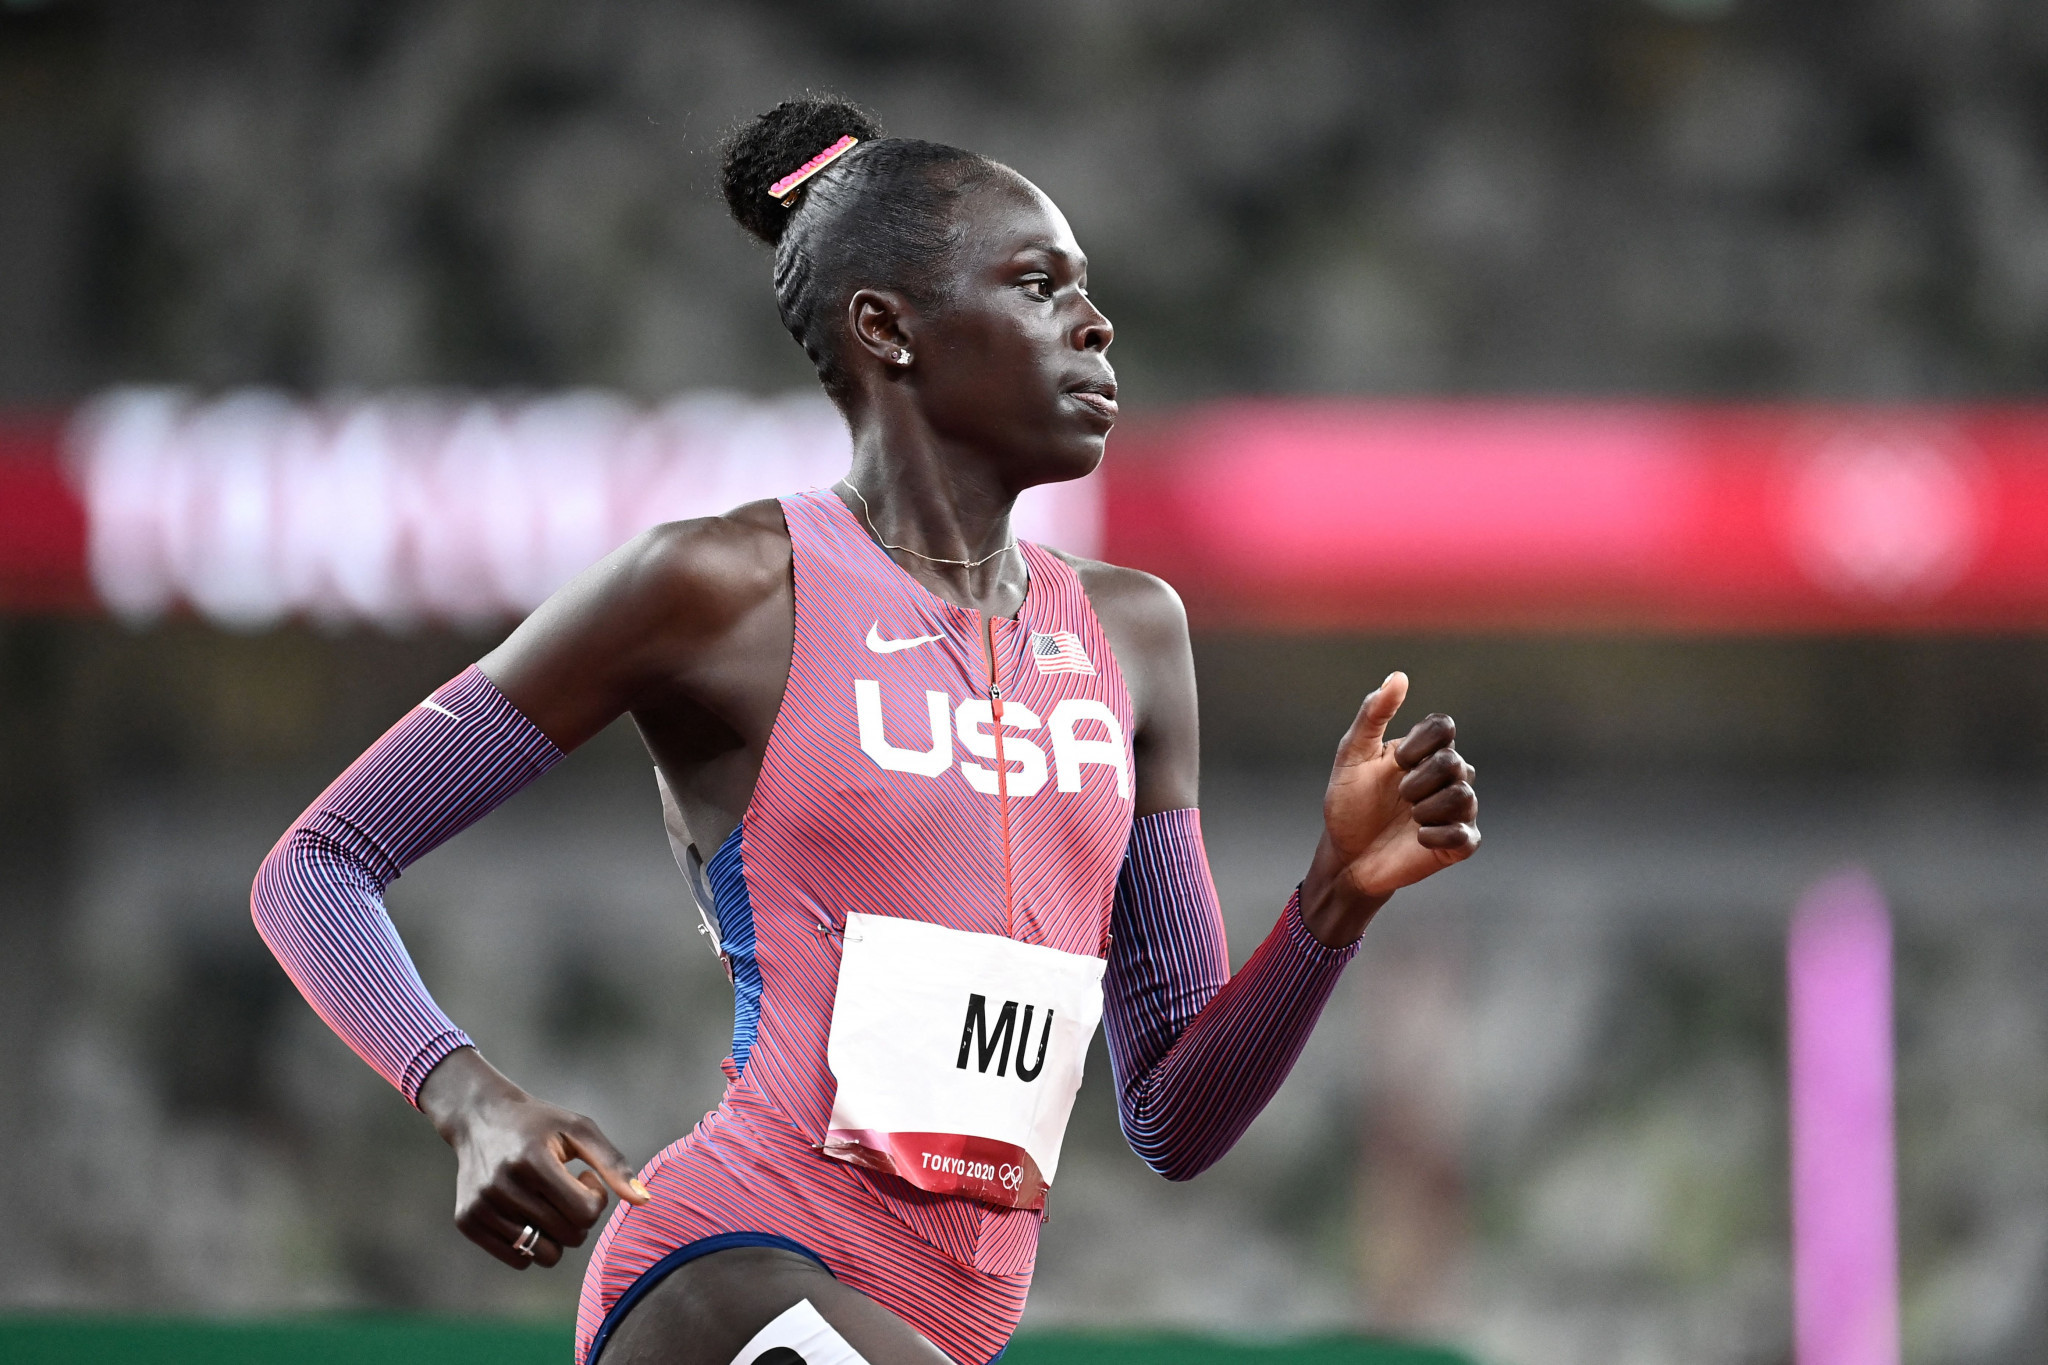 The United States' 800m and 4x400m gold medallist Athing Mu was among the five athletes who failed to reach the Female World Athlete of the Year final five ©Getty Images